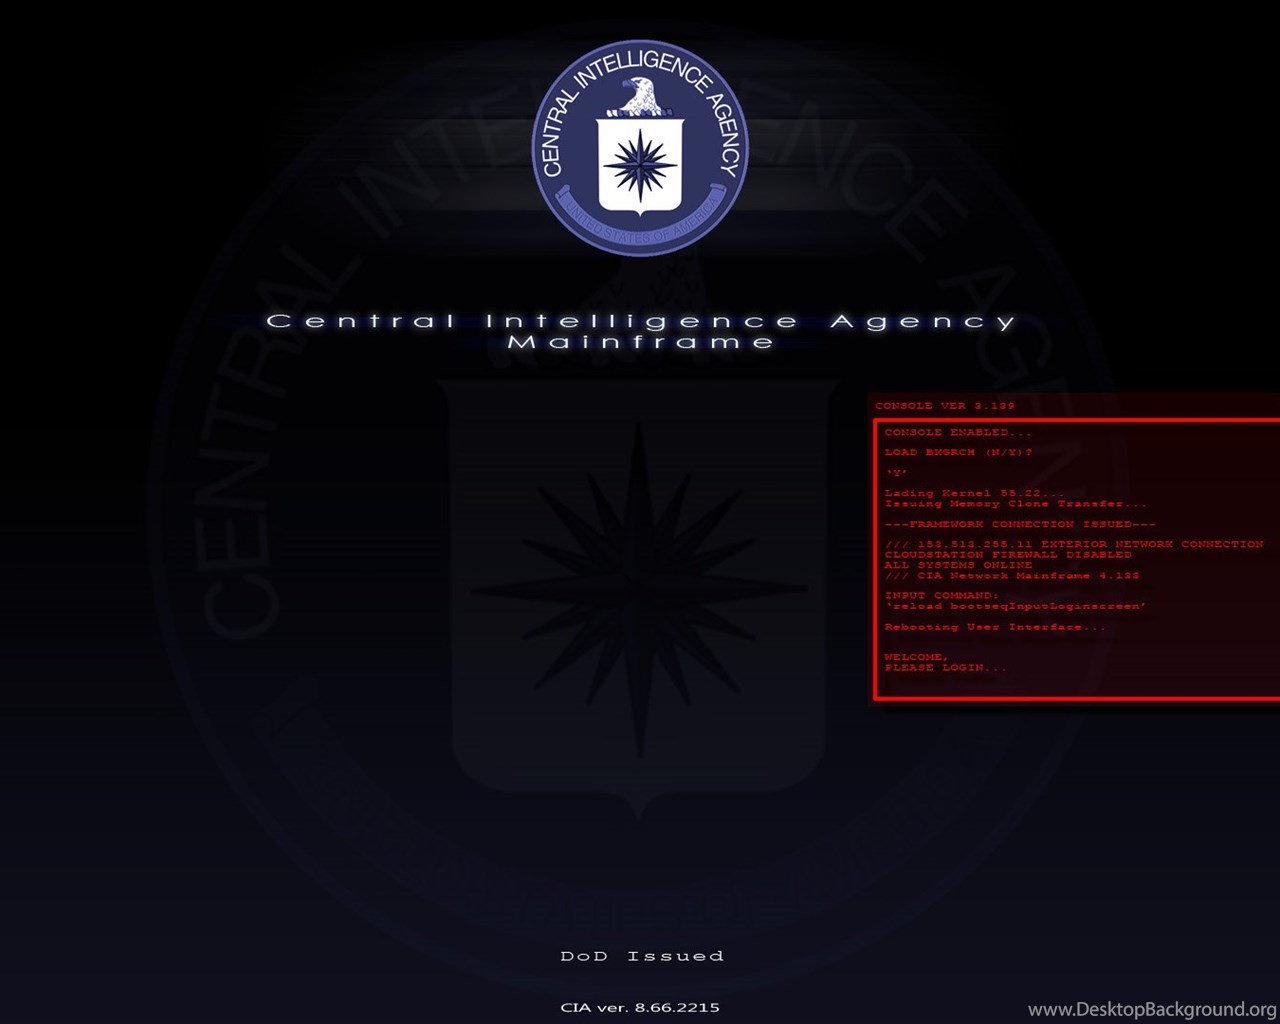 Download Wallpapers Cia The Homepage Of Central Intelligence Agency Http .....